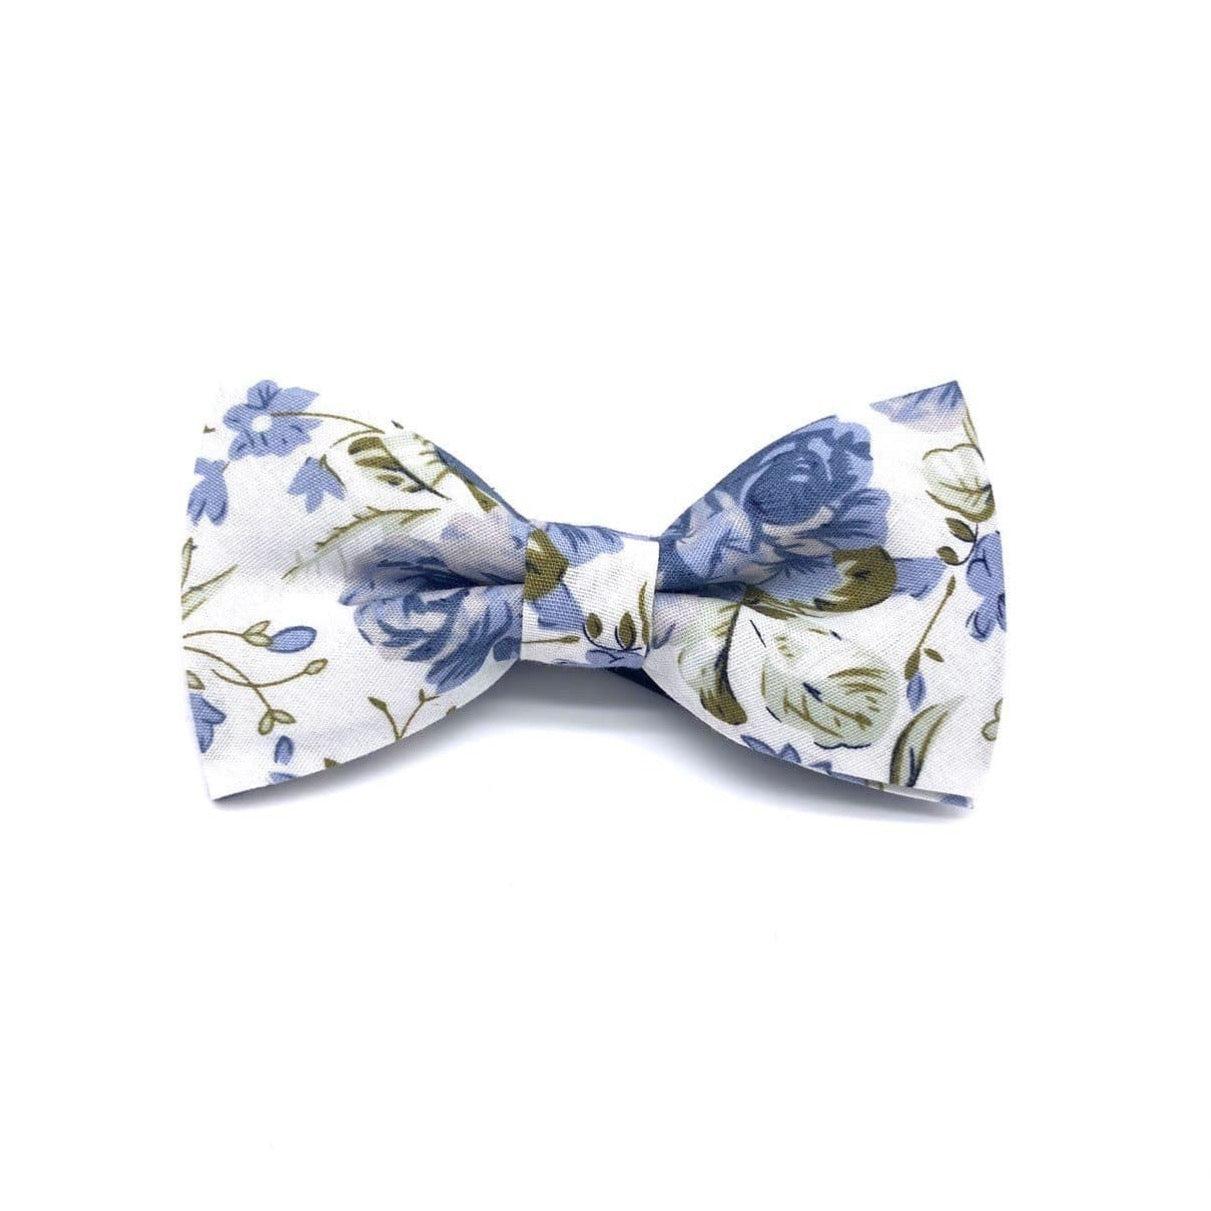 Kids White Floral Bow Tie (Pretied) Mytieshop - SAM | toile de jouy Floral Bow Tie-Kid&#39;s Floral bow tie - toile de jouy Floral Bow Tie Strap is adjustablePre-Tied bowtieBow Tie 10.5 * 6CMFor toddlers ages 0- Great for Prom Dinners Interviews Photo shoots Photo sessions Dates Wedding Attendant Ring Bearers Aspen Floral Bow tie . Fits toddlers and babies. Aspen ow tie toddler floral for wedding and events groom groomsmen flower bow tie mytieshop ring bearer page boy bow tie white bow tie white and